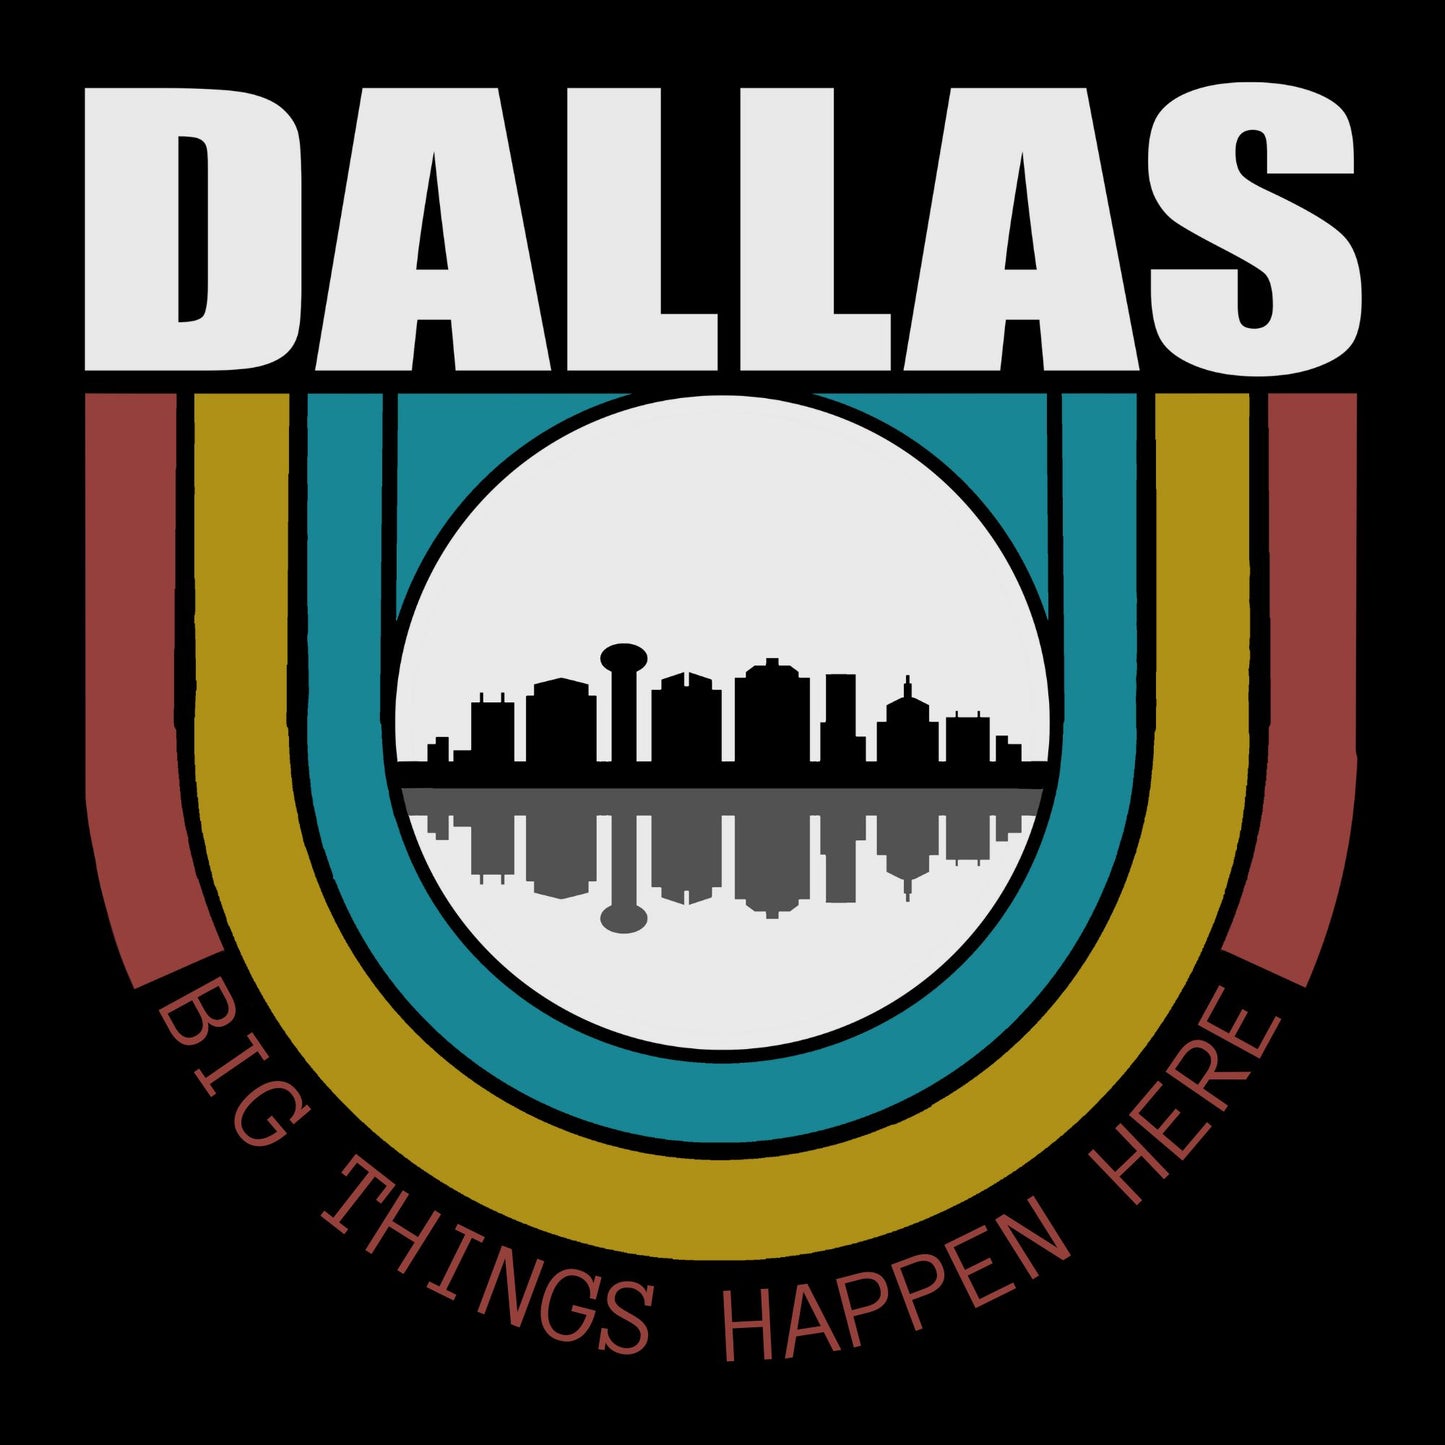 Dallas Downtown Multi-Colors Logo T-Shirt: Experience Urban Style with this Stylish Tee - Perfect Blend of Dallas Pride and Vibrant City Aesthetics |